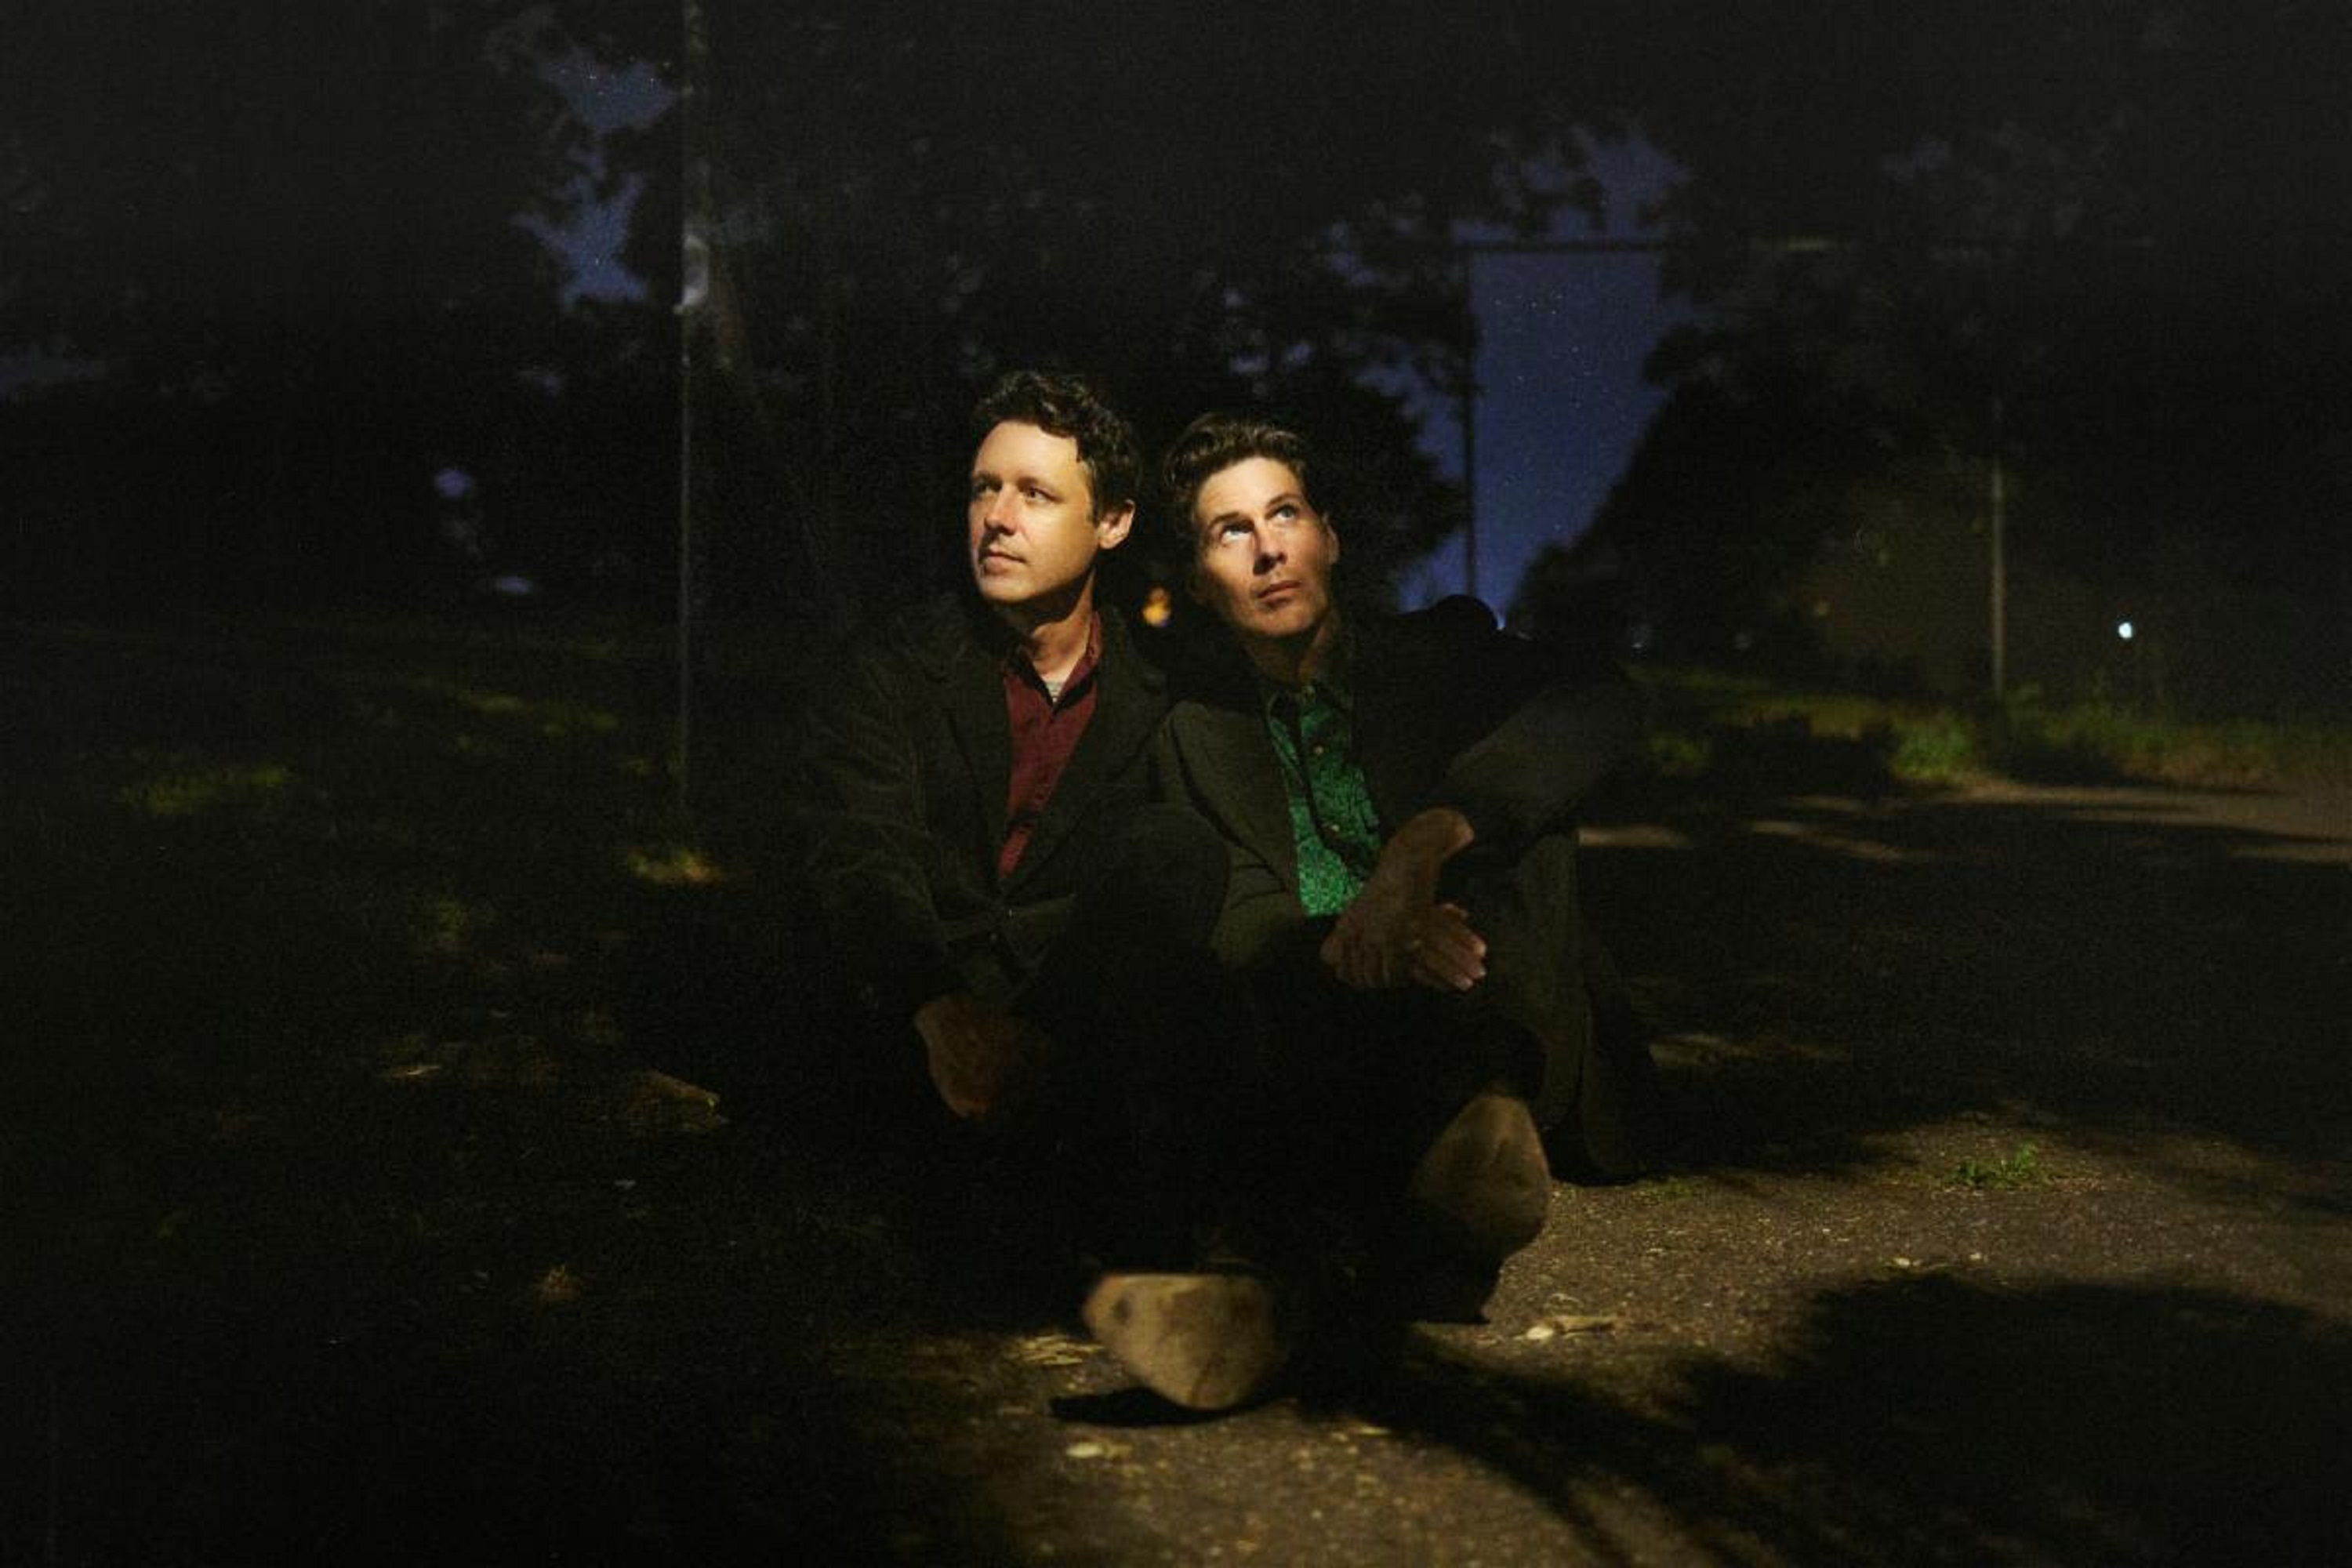 The Cactus Blossoms bring Saturday night two-steppin' joy to new track + announce Opry debut